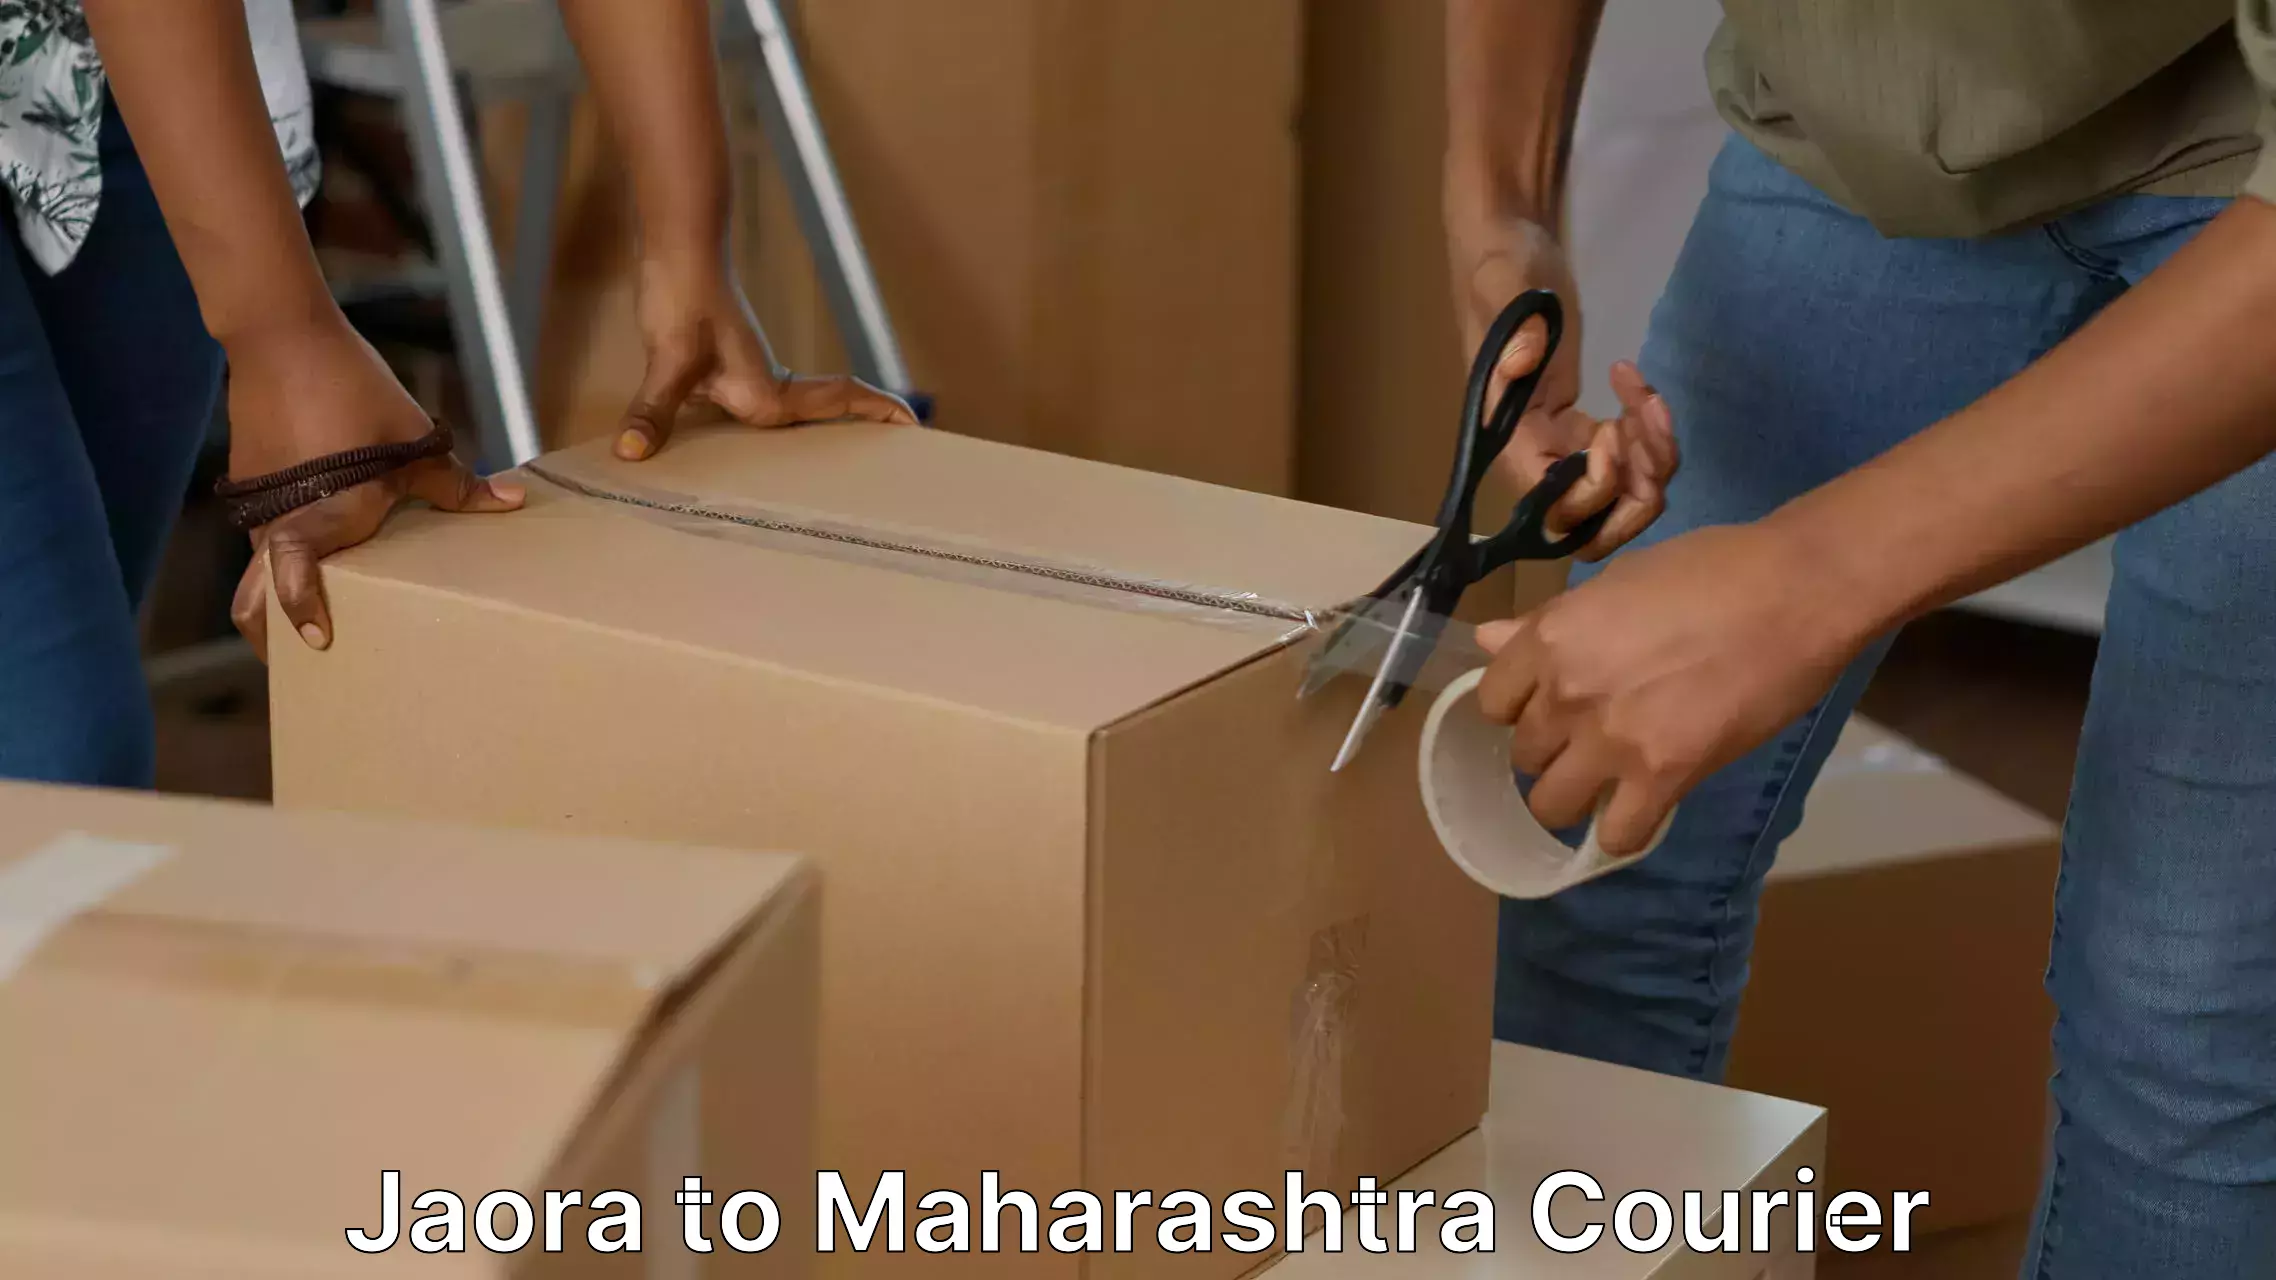 Household goods movers and packers Jaora to Mahabaleshwar